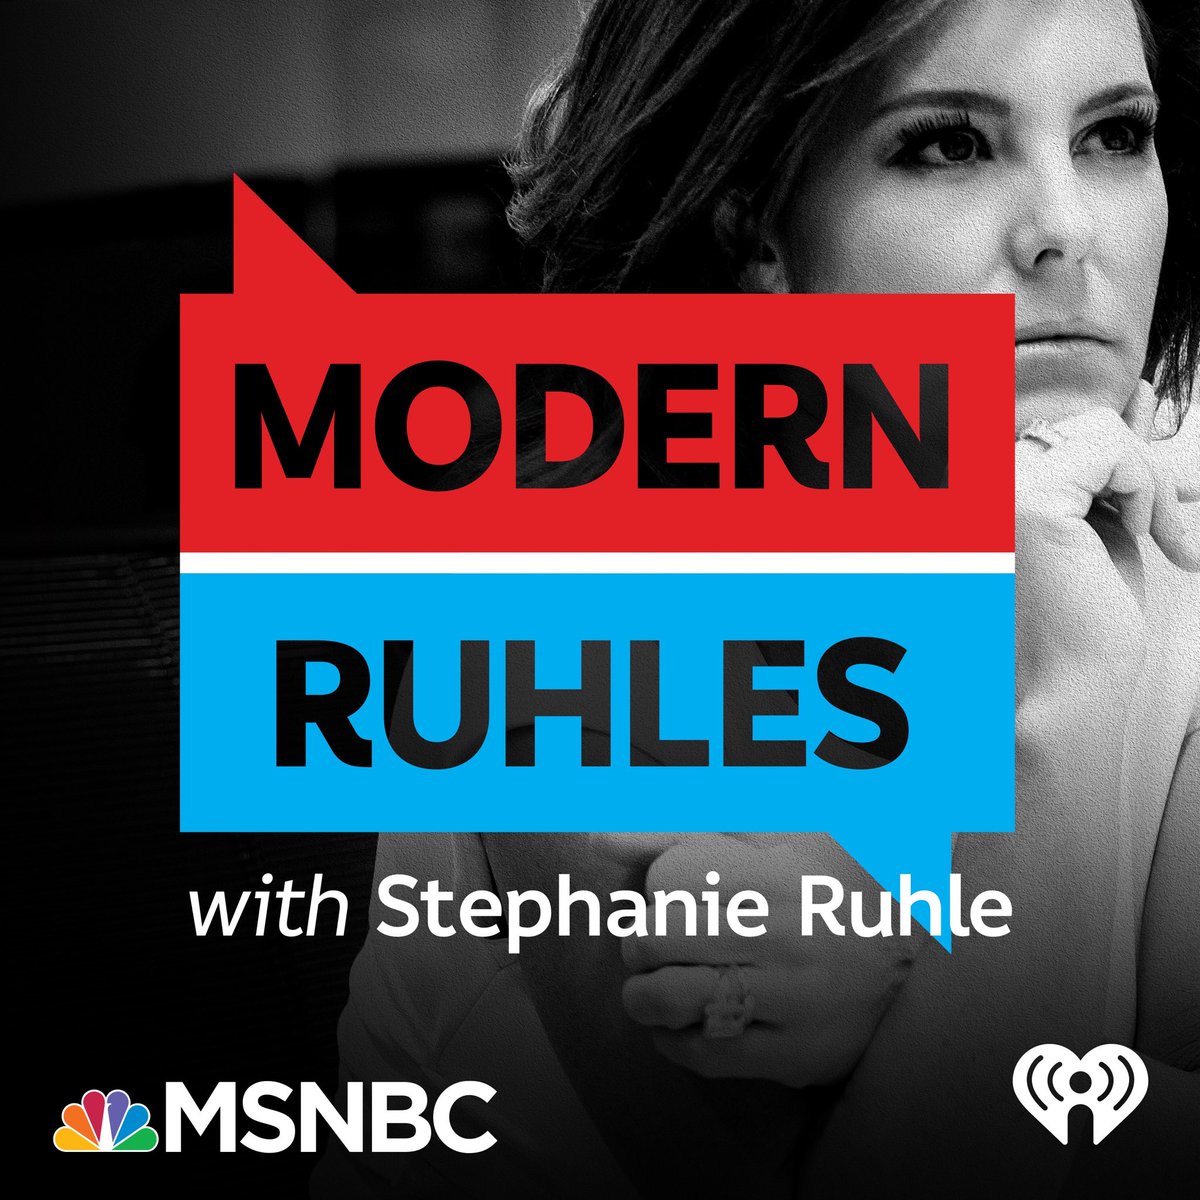 Thank you ⁦@SRuhle⁩ for giving me the opportunity to be heard & for allowing me to share the same platform with ⁦@terrycrews⁩ & ⁦@questlove⁩ to discuss masculinity on your podcast #ModernRuhles. 

#MeToo 

iheart.com/podcast/1119-m…